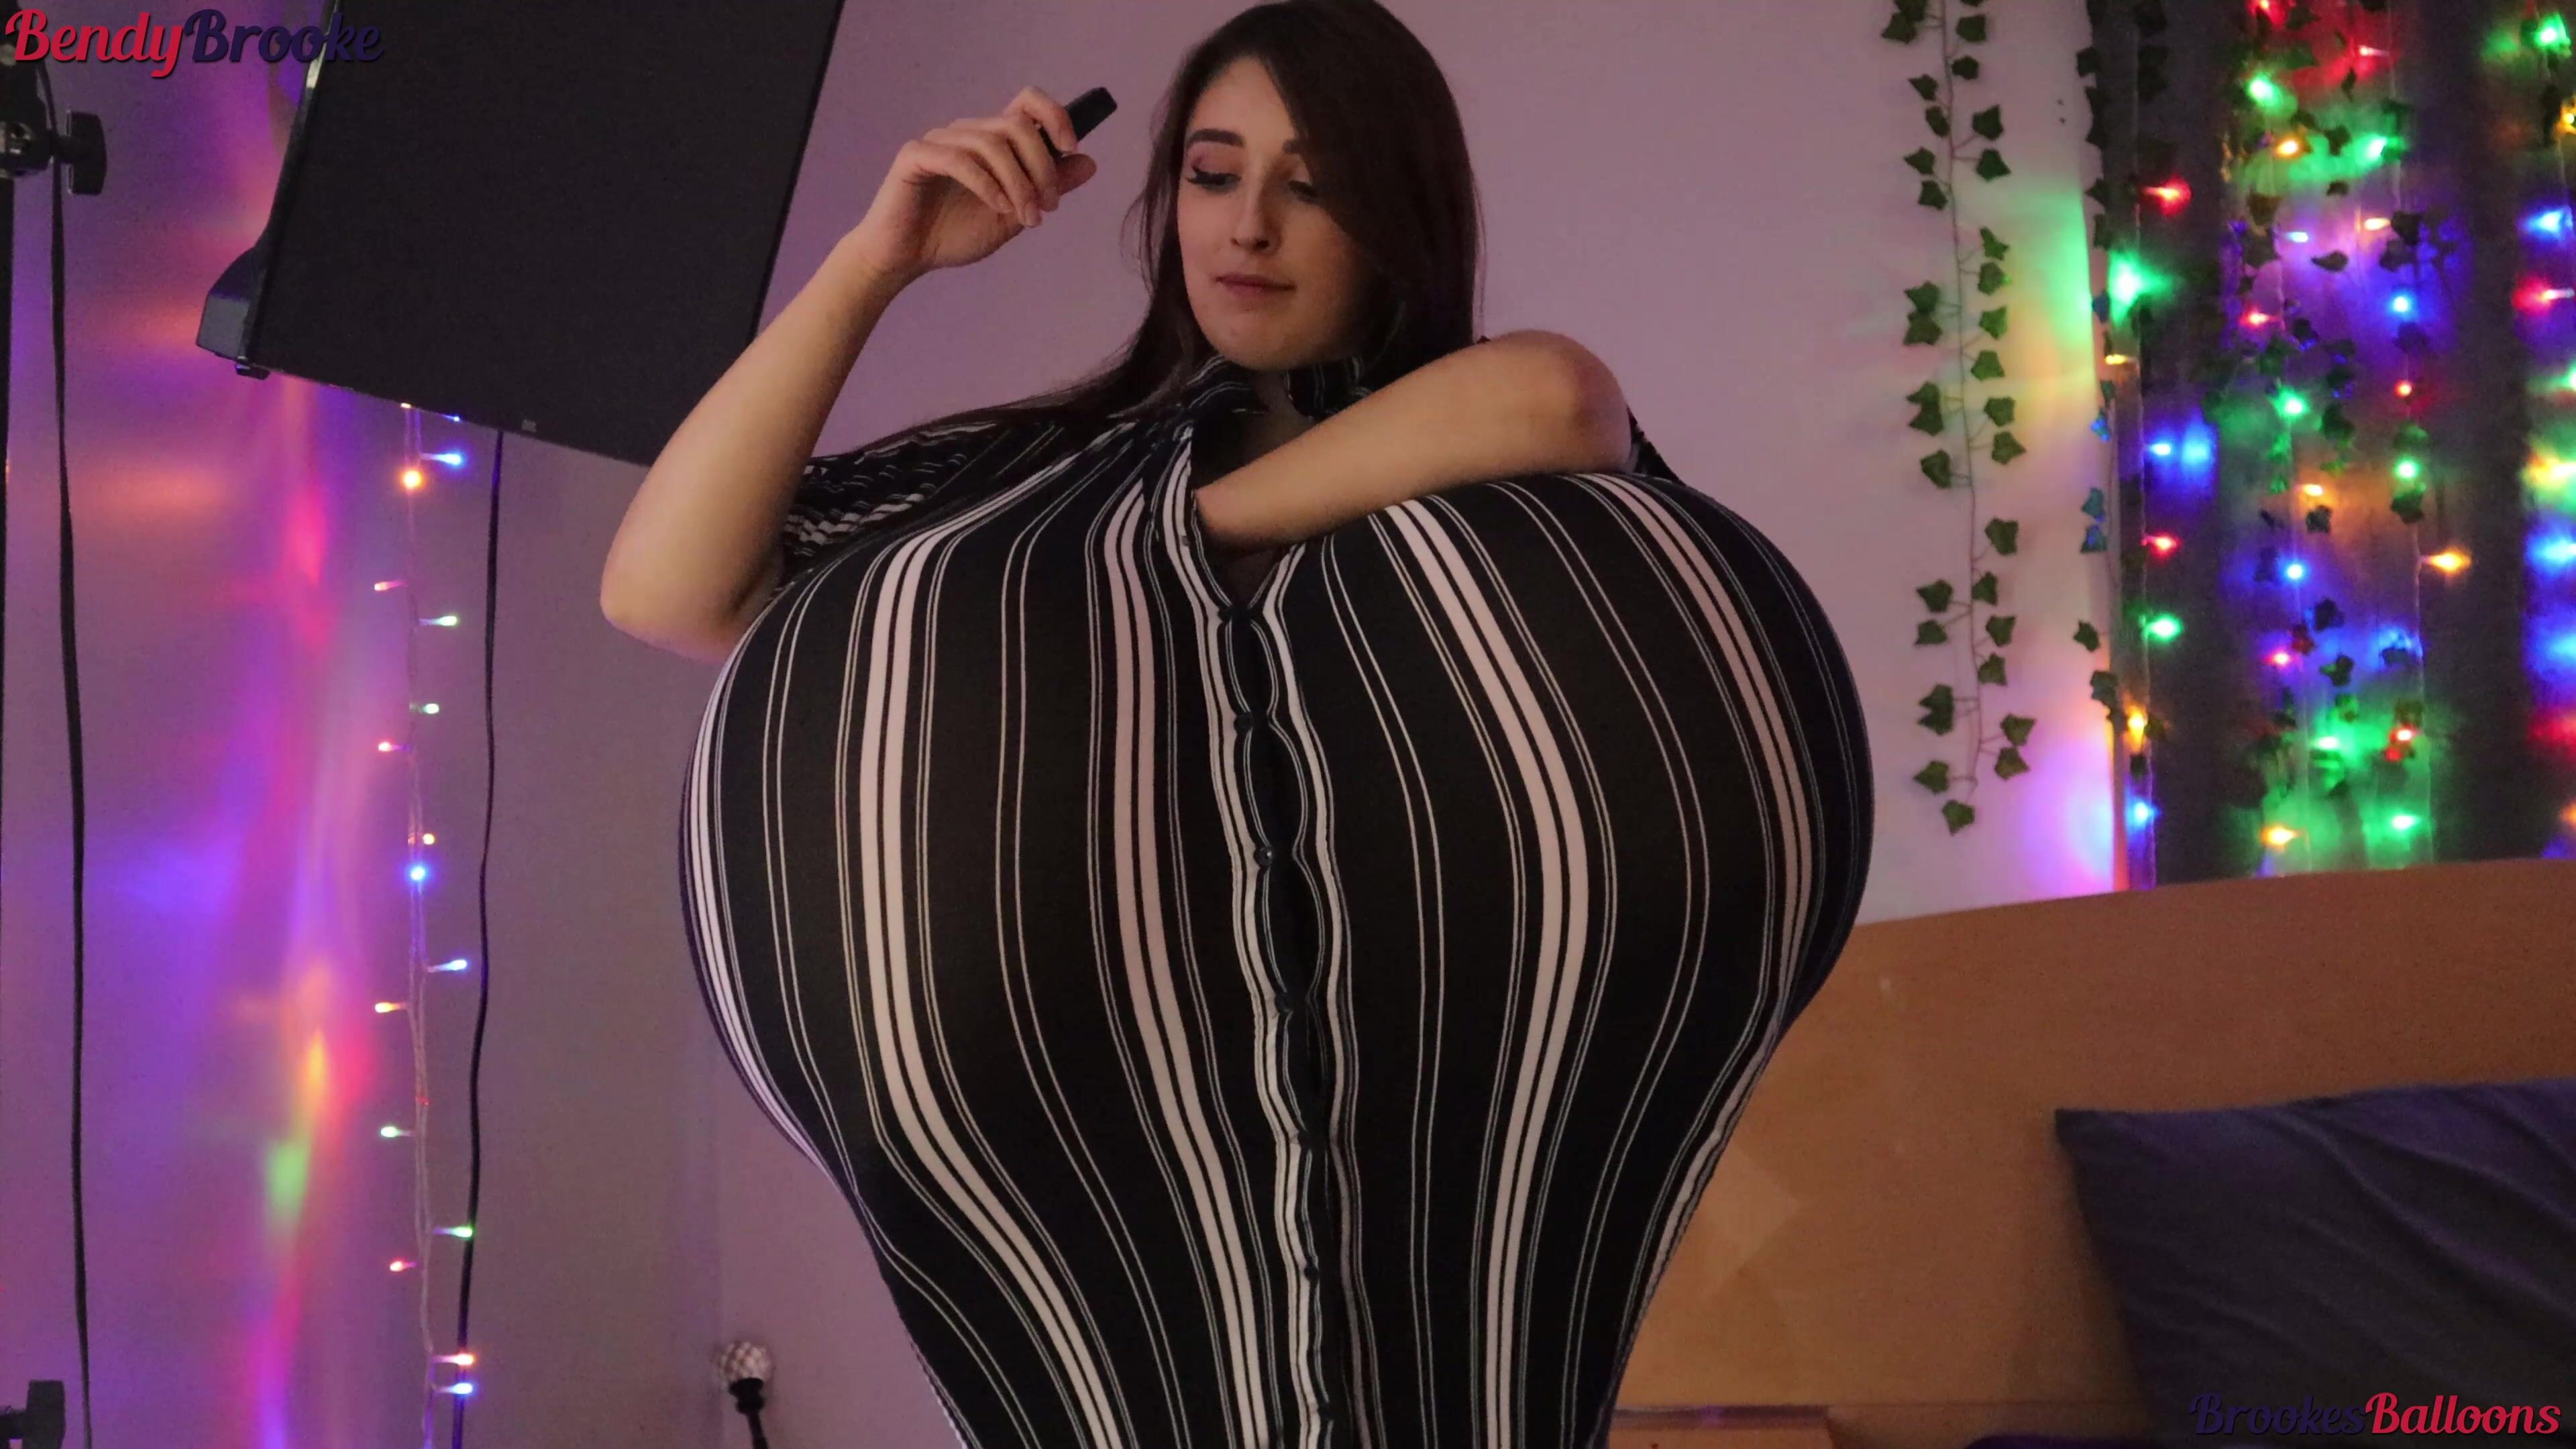 BendyBrooke - Inflating My Huge Balloon Boobs in Black and White Striped Button Down Dress Non-Pop